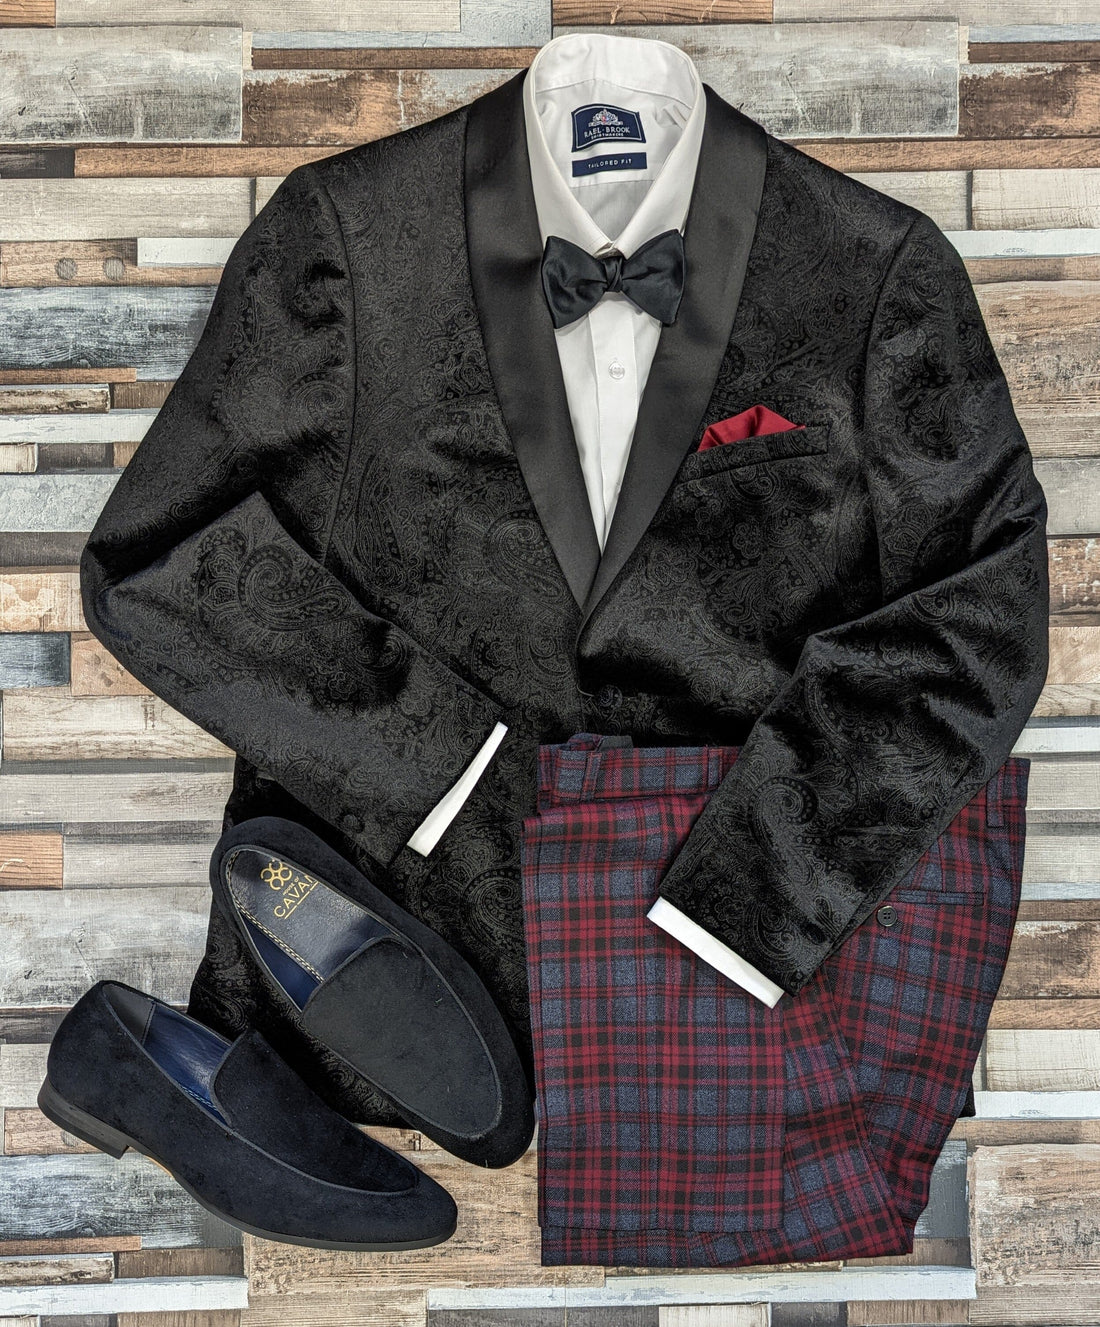 'Tis (nearly) the season!. Mens style fashion tips from THREADPEPPER.